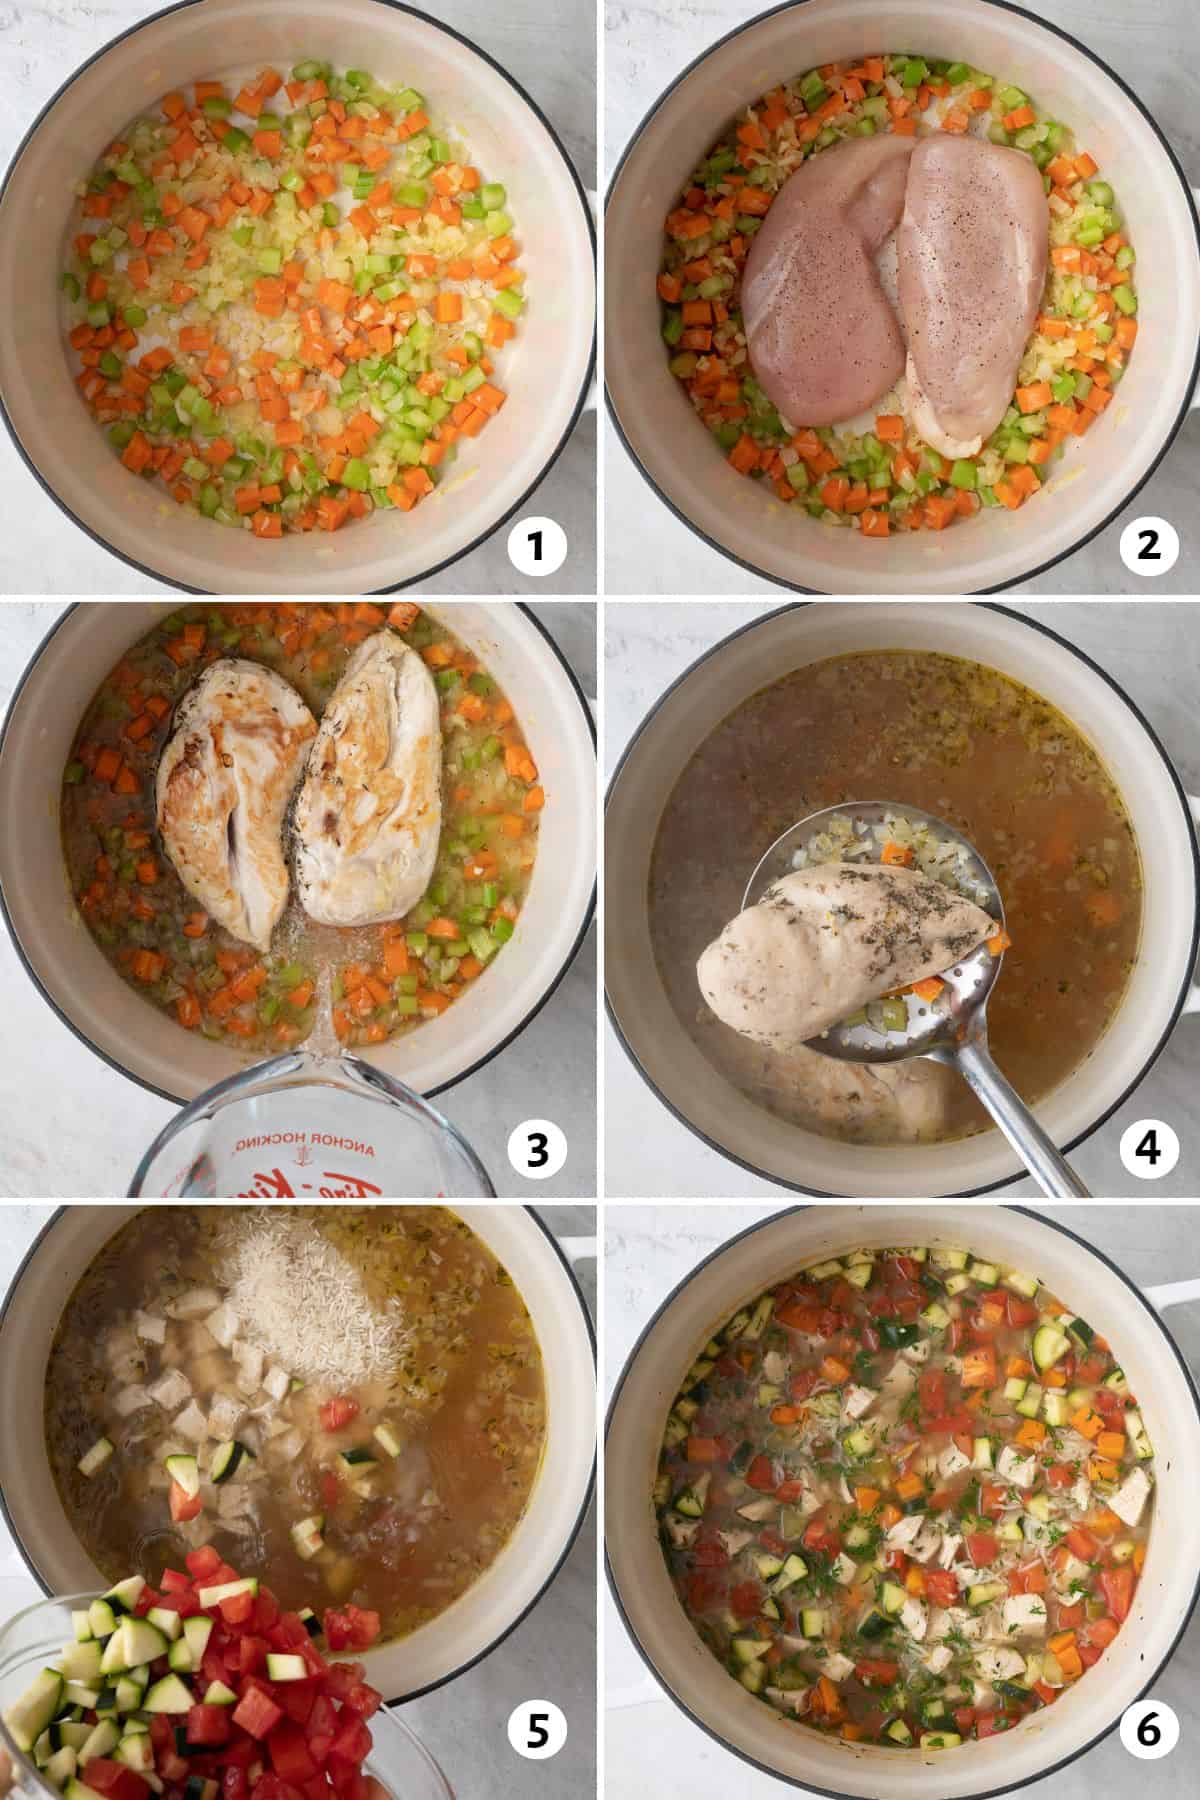 6 image collage making soup in one pot: 1- cooked onions, carrots, celery and garlic, 2- two chicken breast nestled in center of cooked veggies, 3- water being poured in, 4- ladle scooping out cooked chicken, 5- chicken, rice, and chopped vegetables added to soup, 6- soup after cooked.